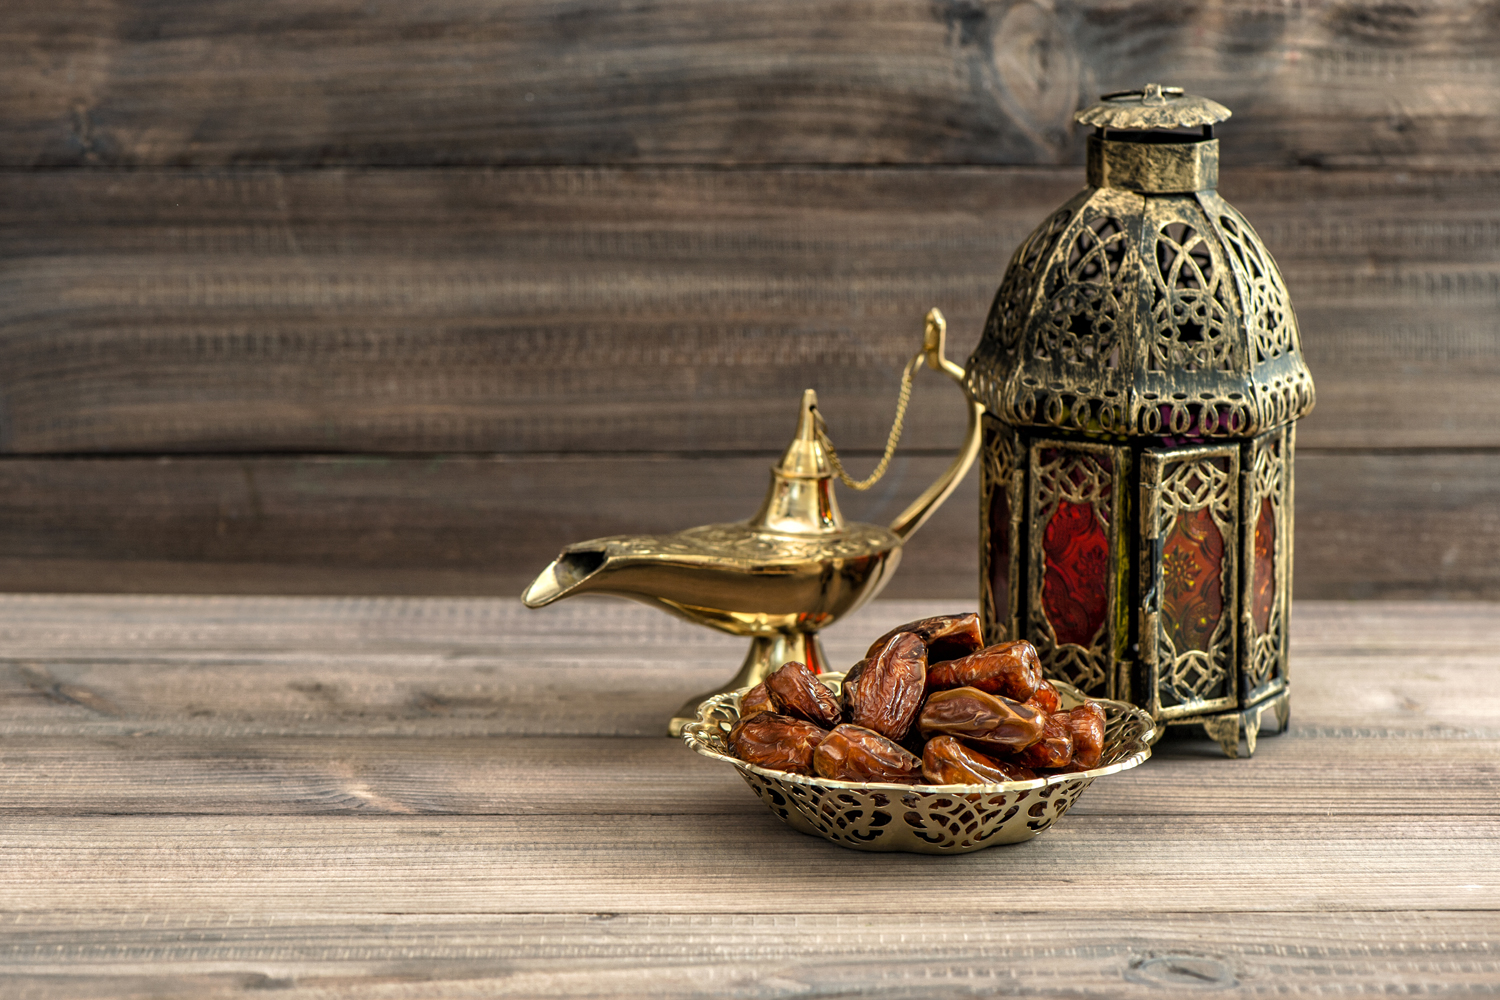 How should you behave during Ramadan? Rules and etiquette guide